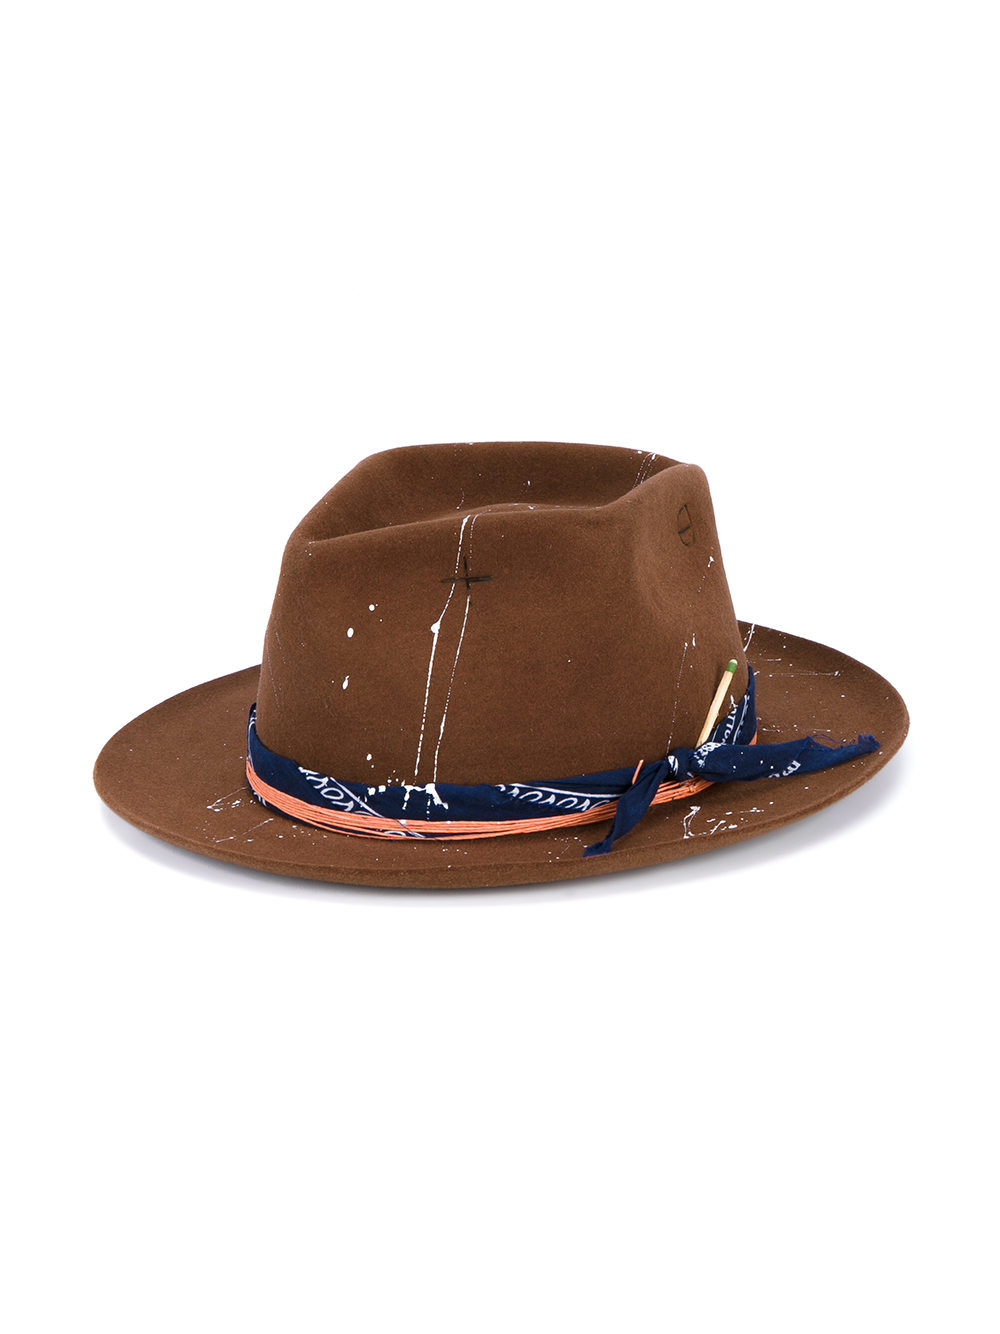 Lyst - Nick Fouquet Maritime Hat in Brown for Men